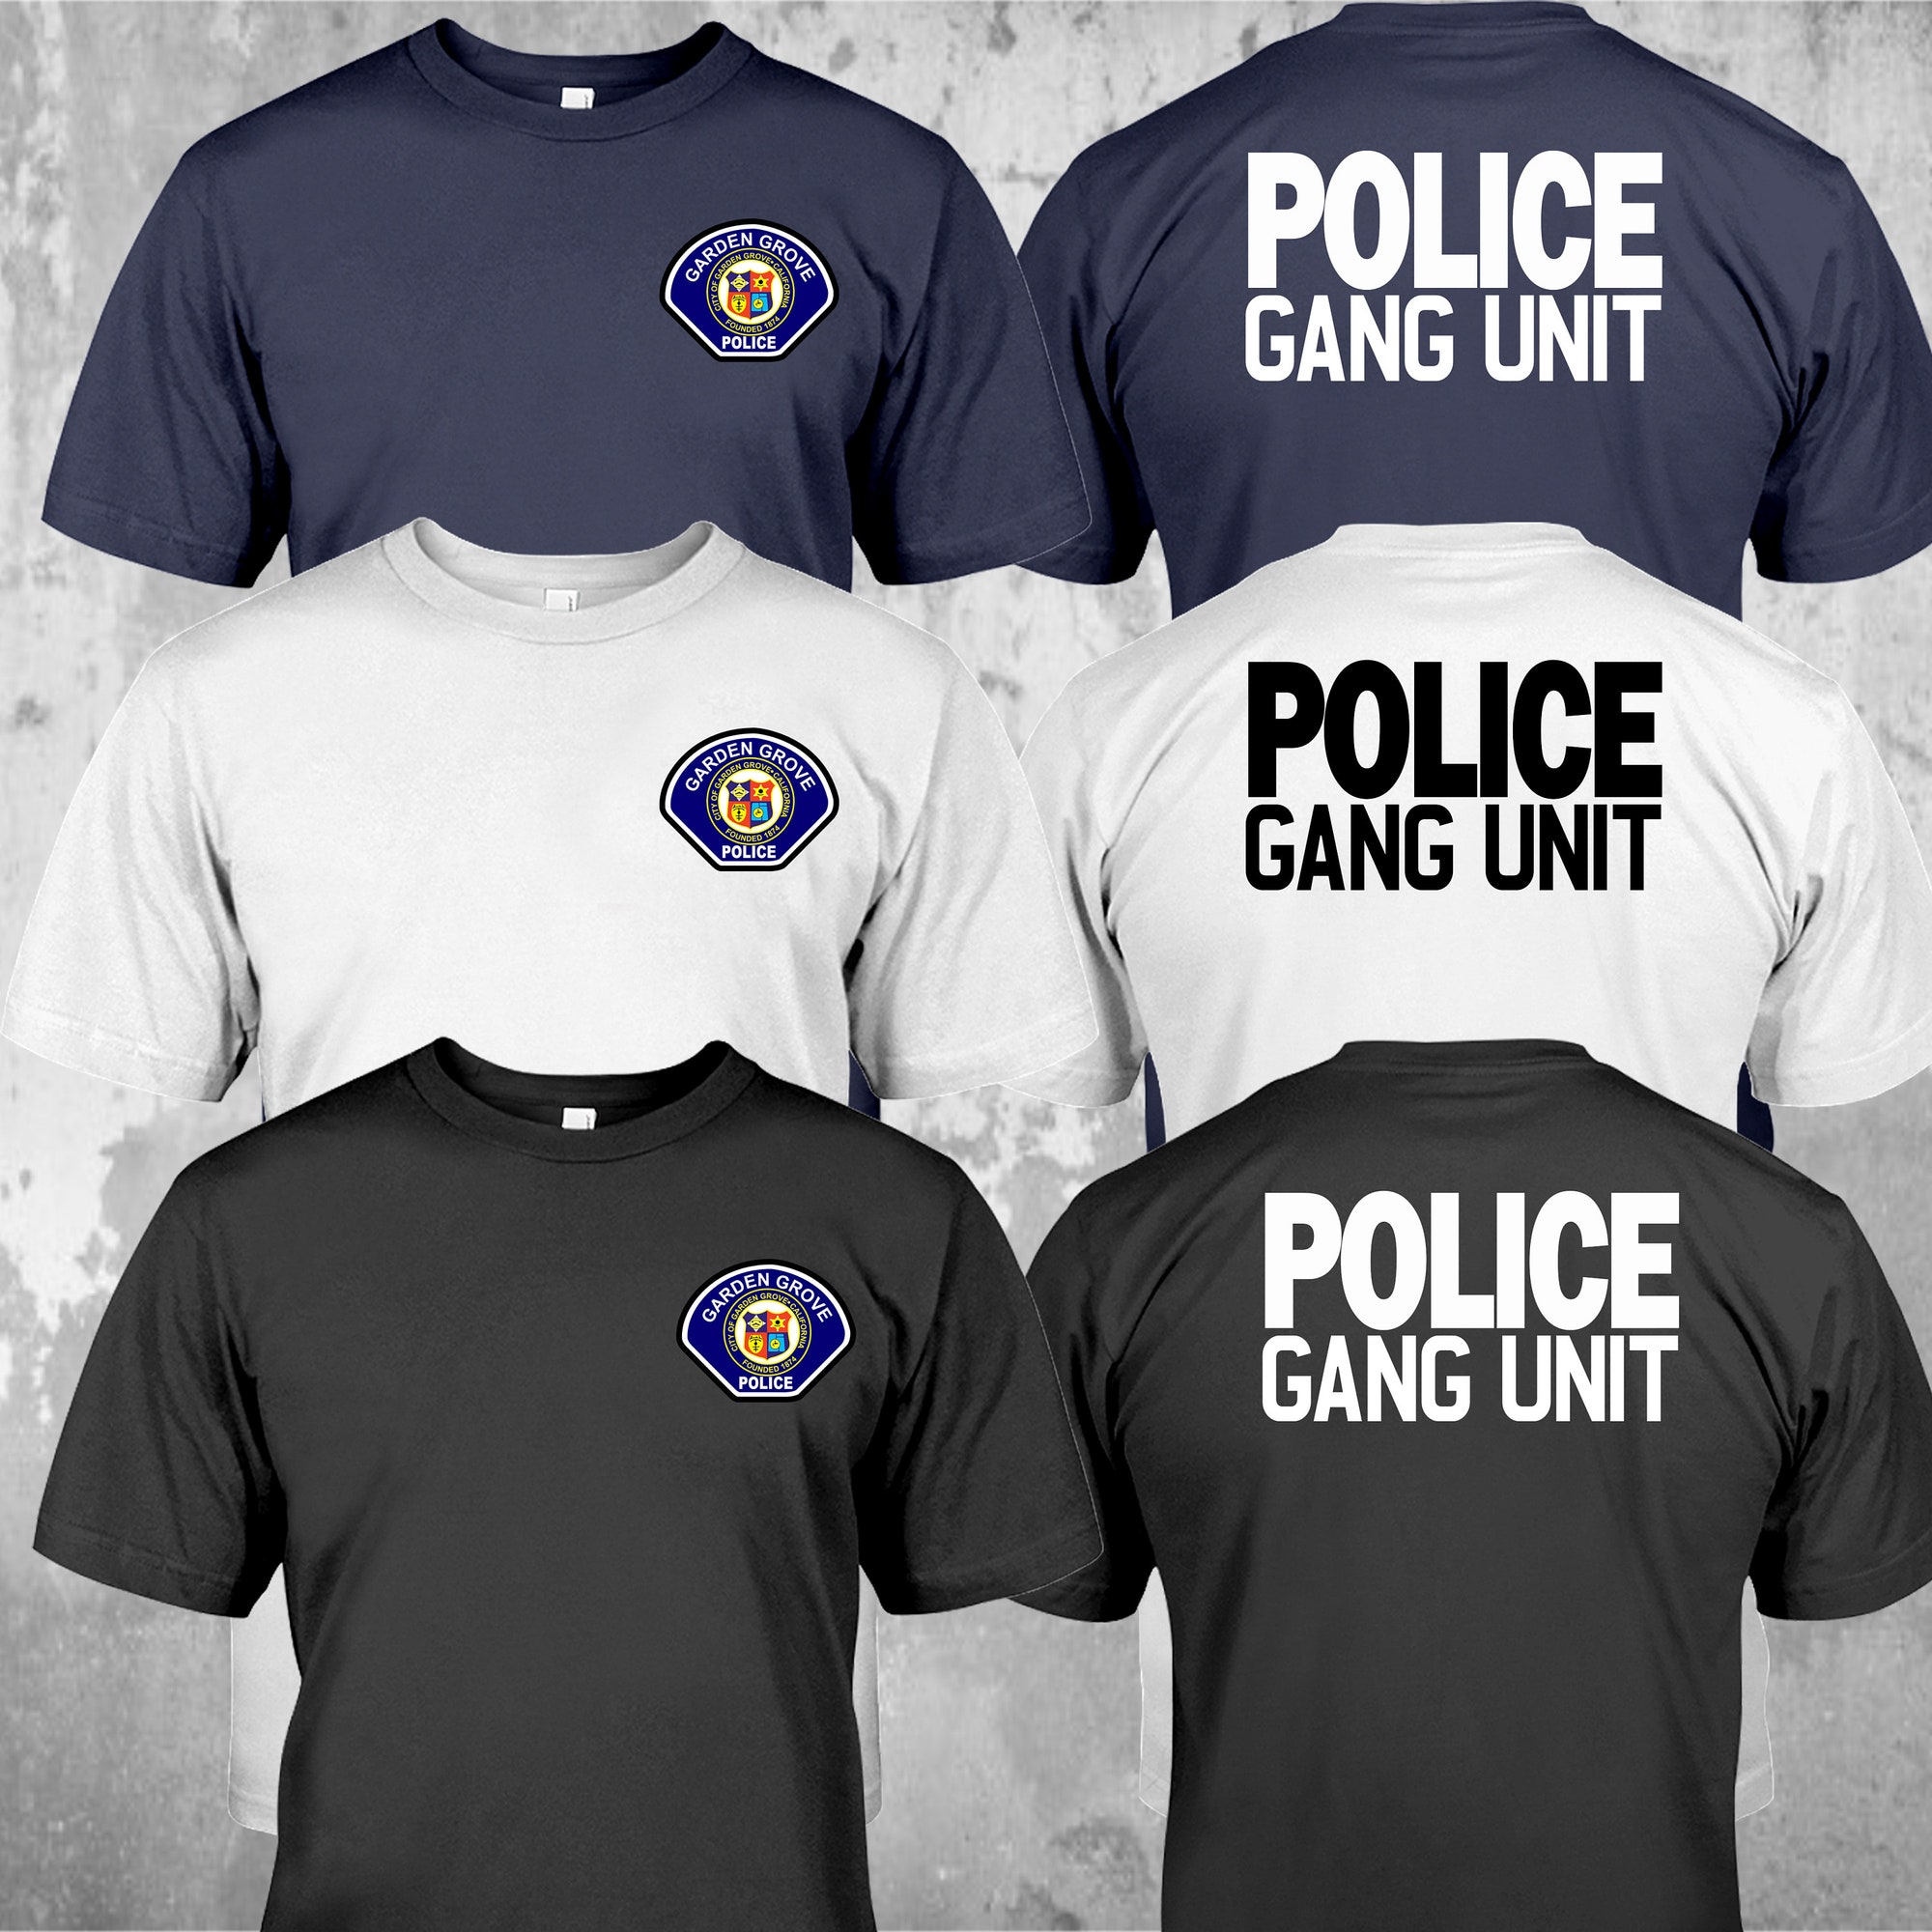 Police Gang Unit Garden Grove Orange County California US Unites States Special Force T-Shirt